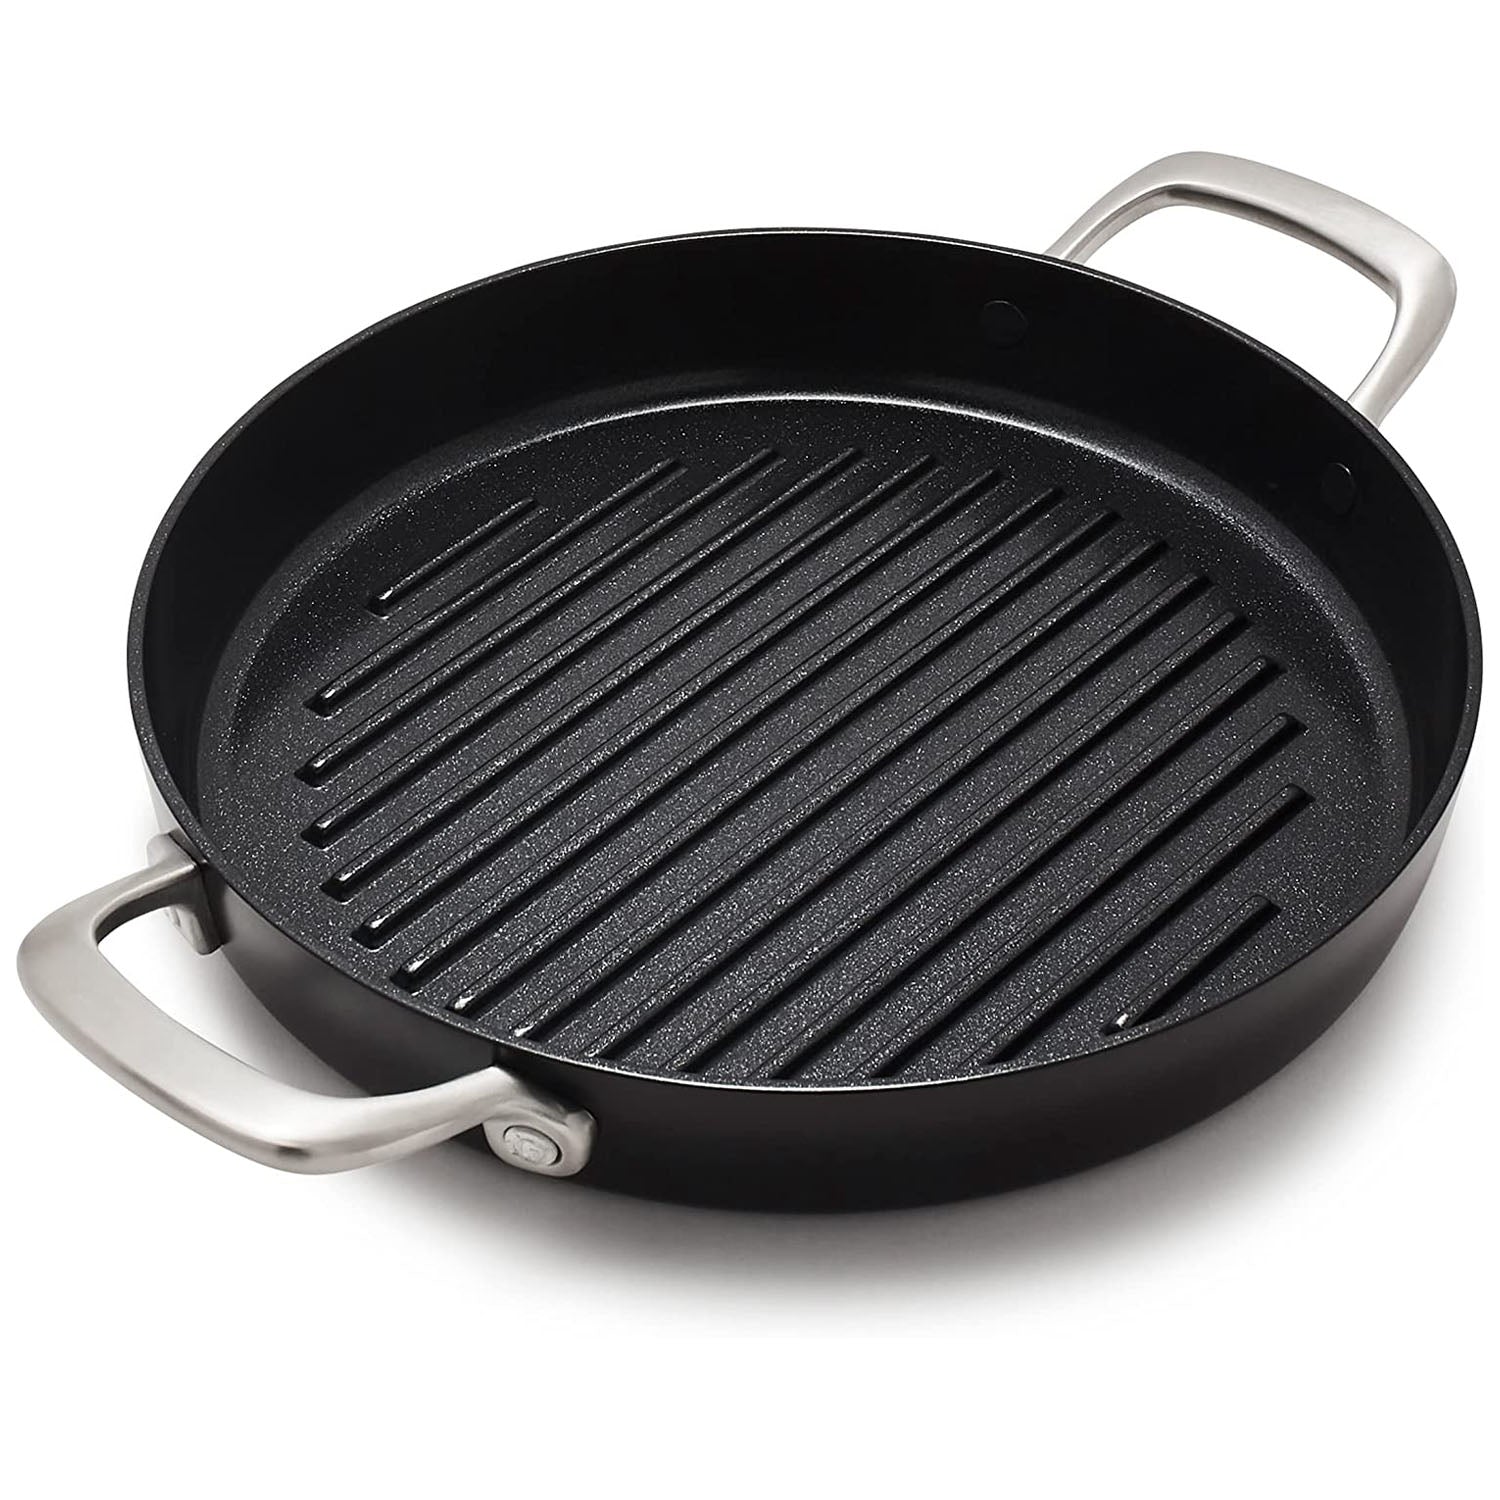 All-Clad Cast Iron Square Griddle, 11